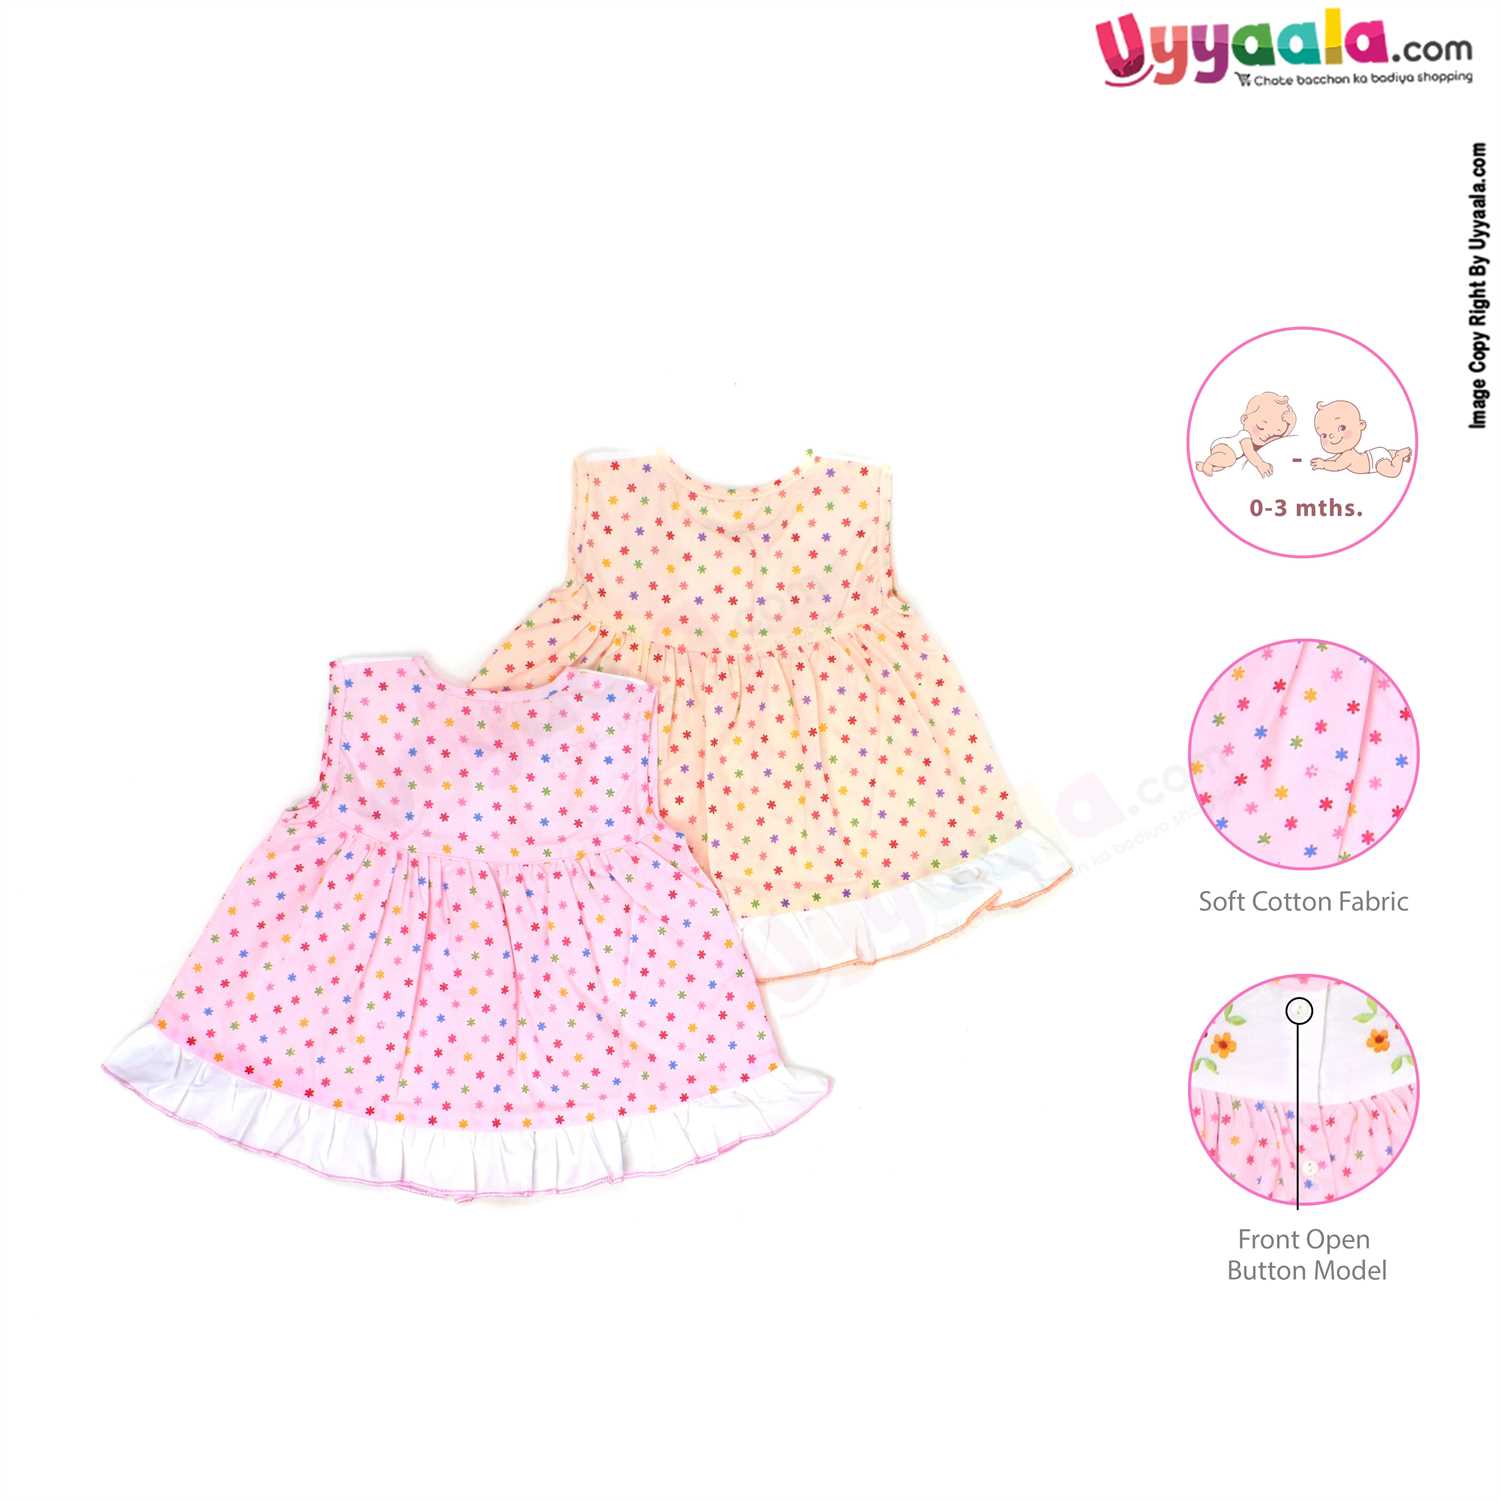 Half Sleeve Baby Frock Front Open Button Model, Premium Quality Cotton Flower Print 2 Pack - Pink & Peach (0-3M)